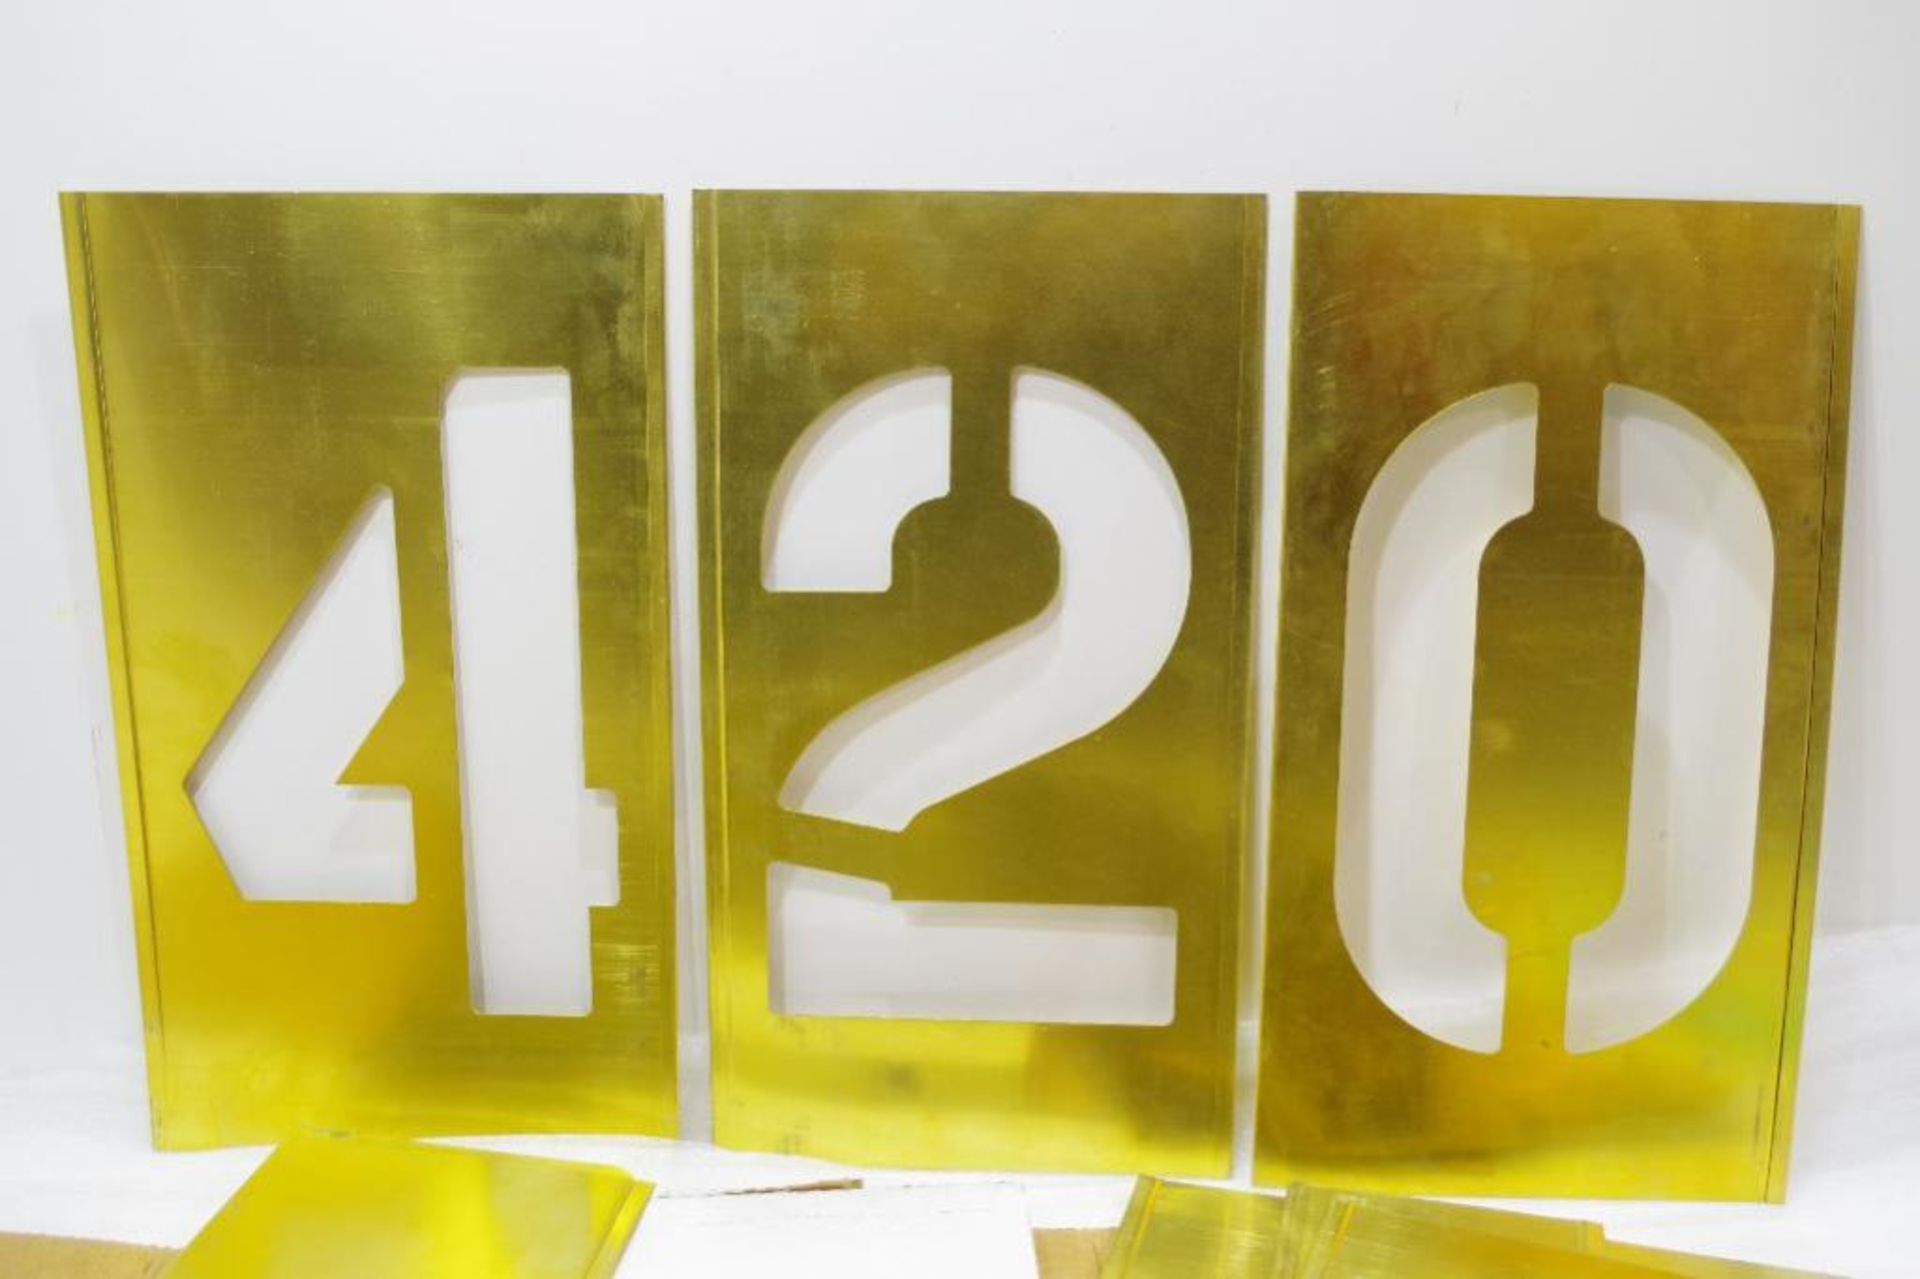 (13) Piece Numbers 8" Brass Stencil Kit (Contains 0 - 9 and 3 other spacers) - Image 3 of 4